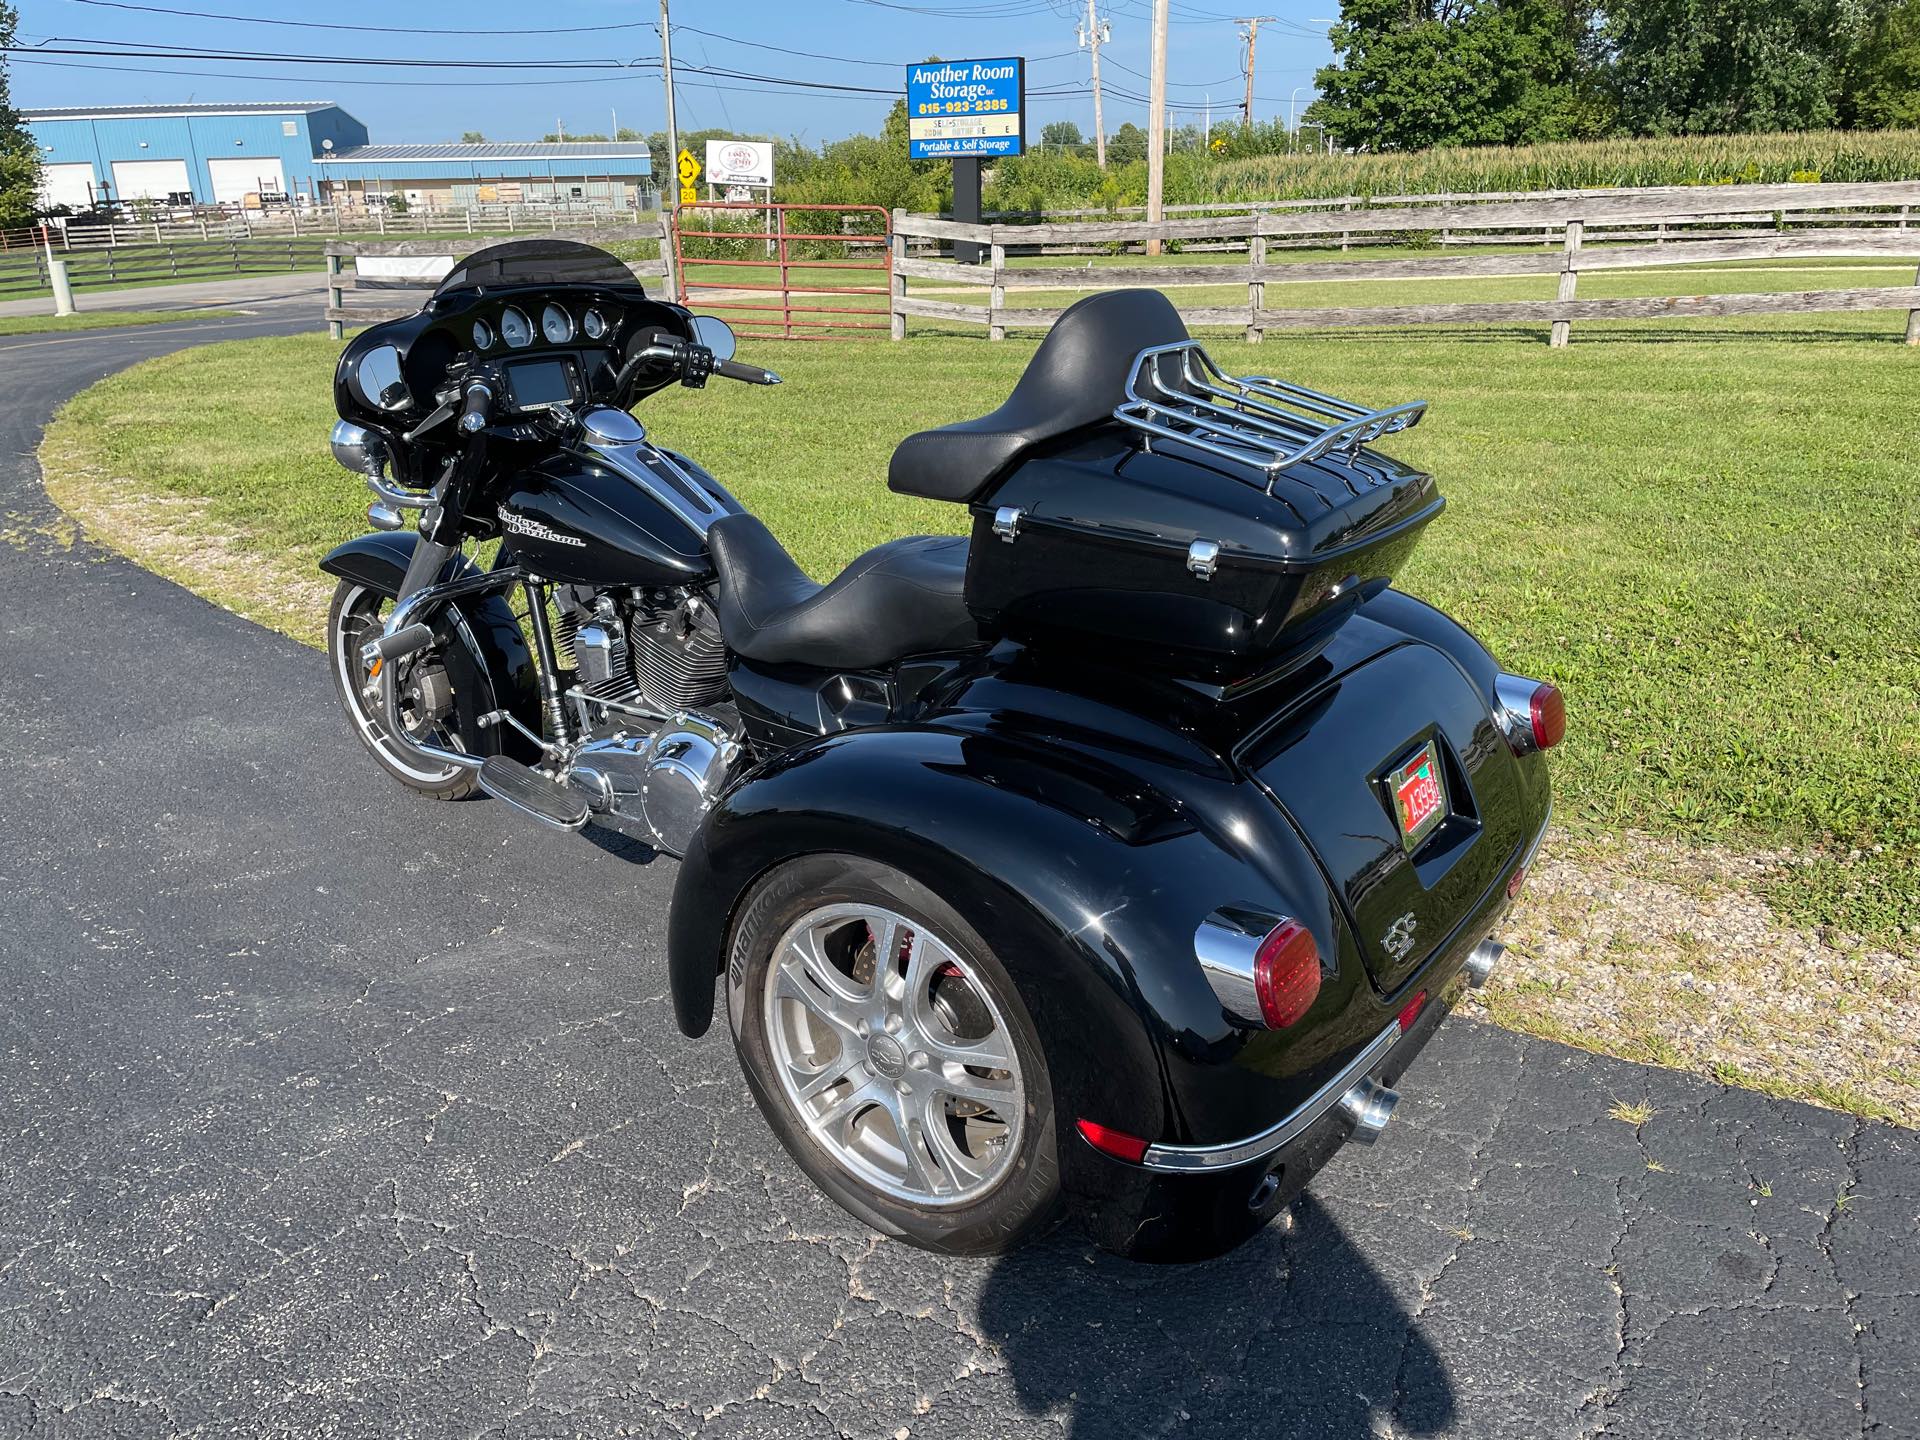 2014 Harley-Davidson Street Glide Special at Randy's Cycle